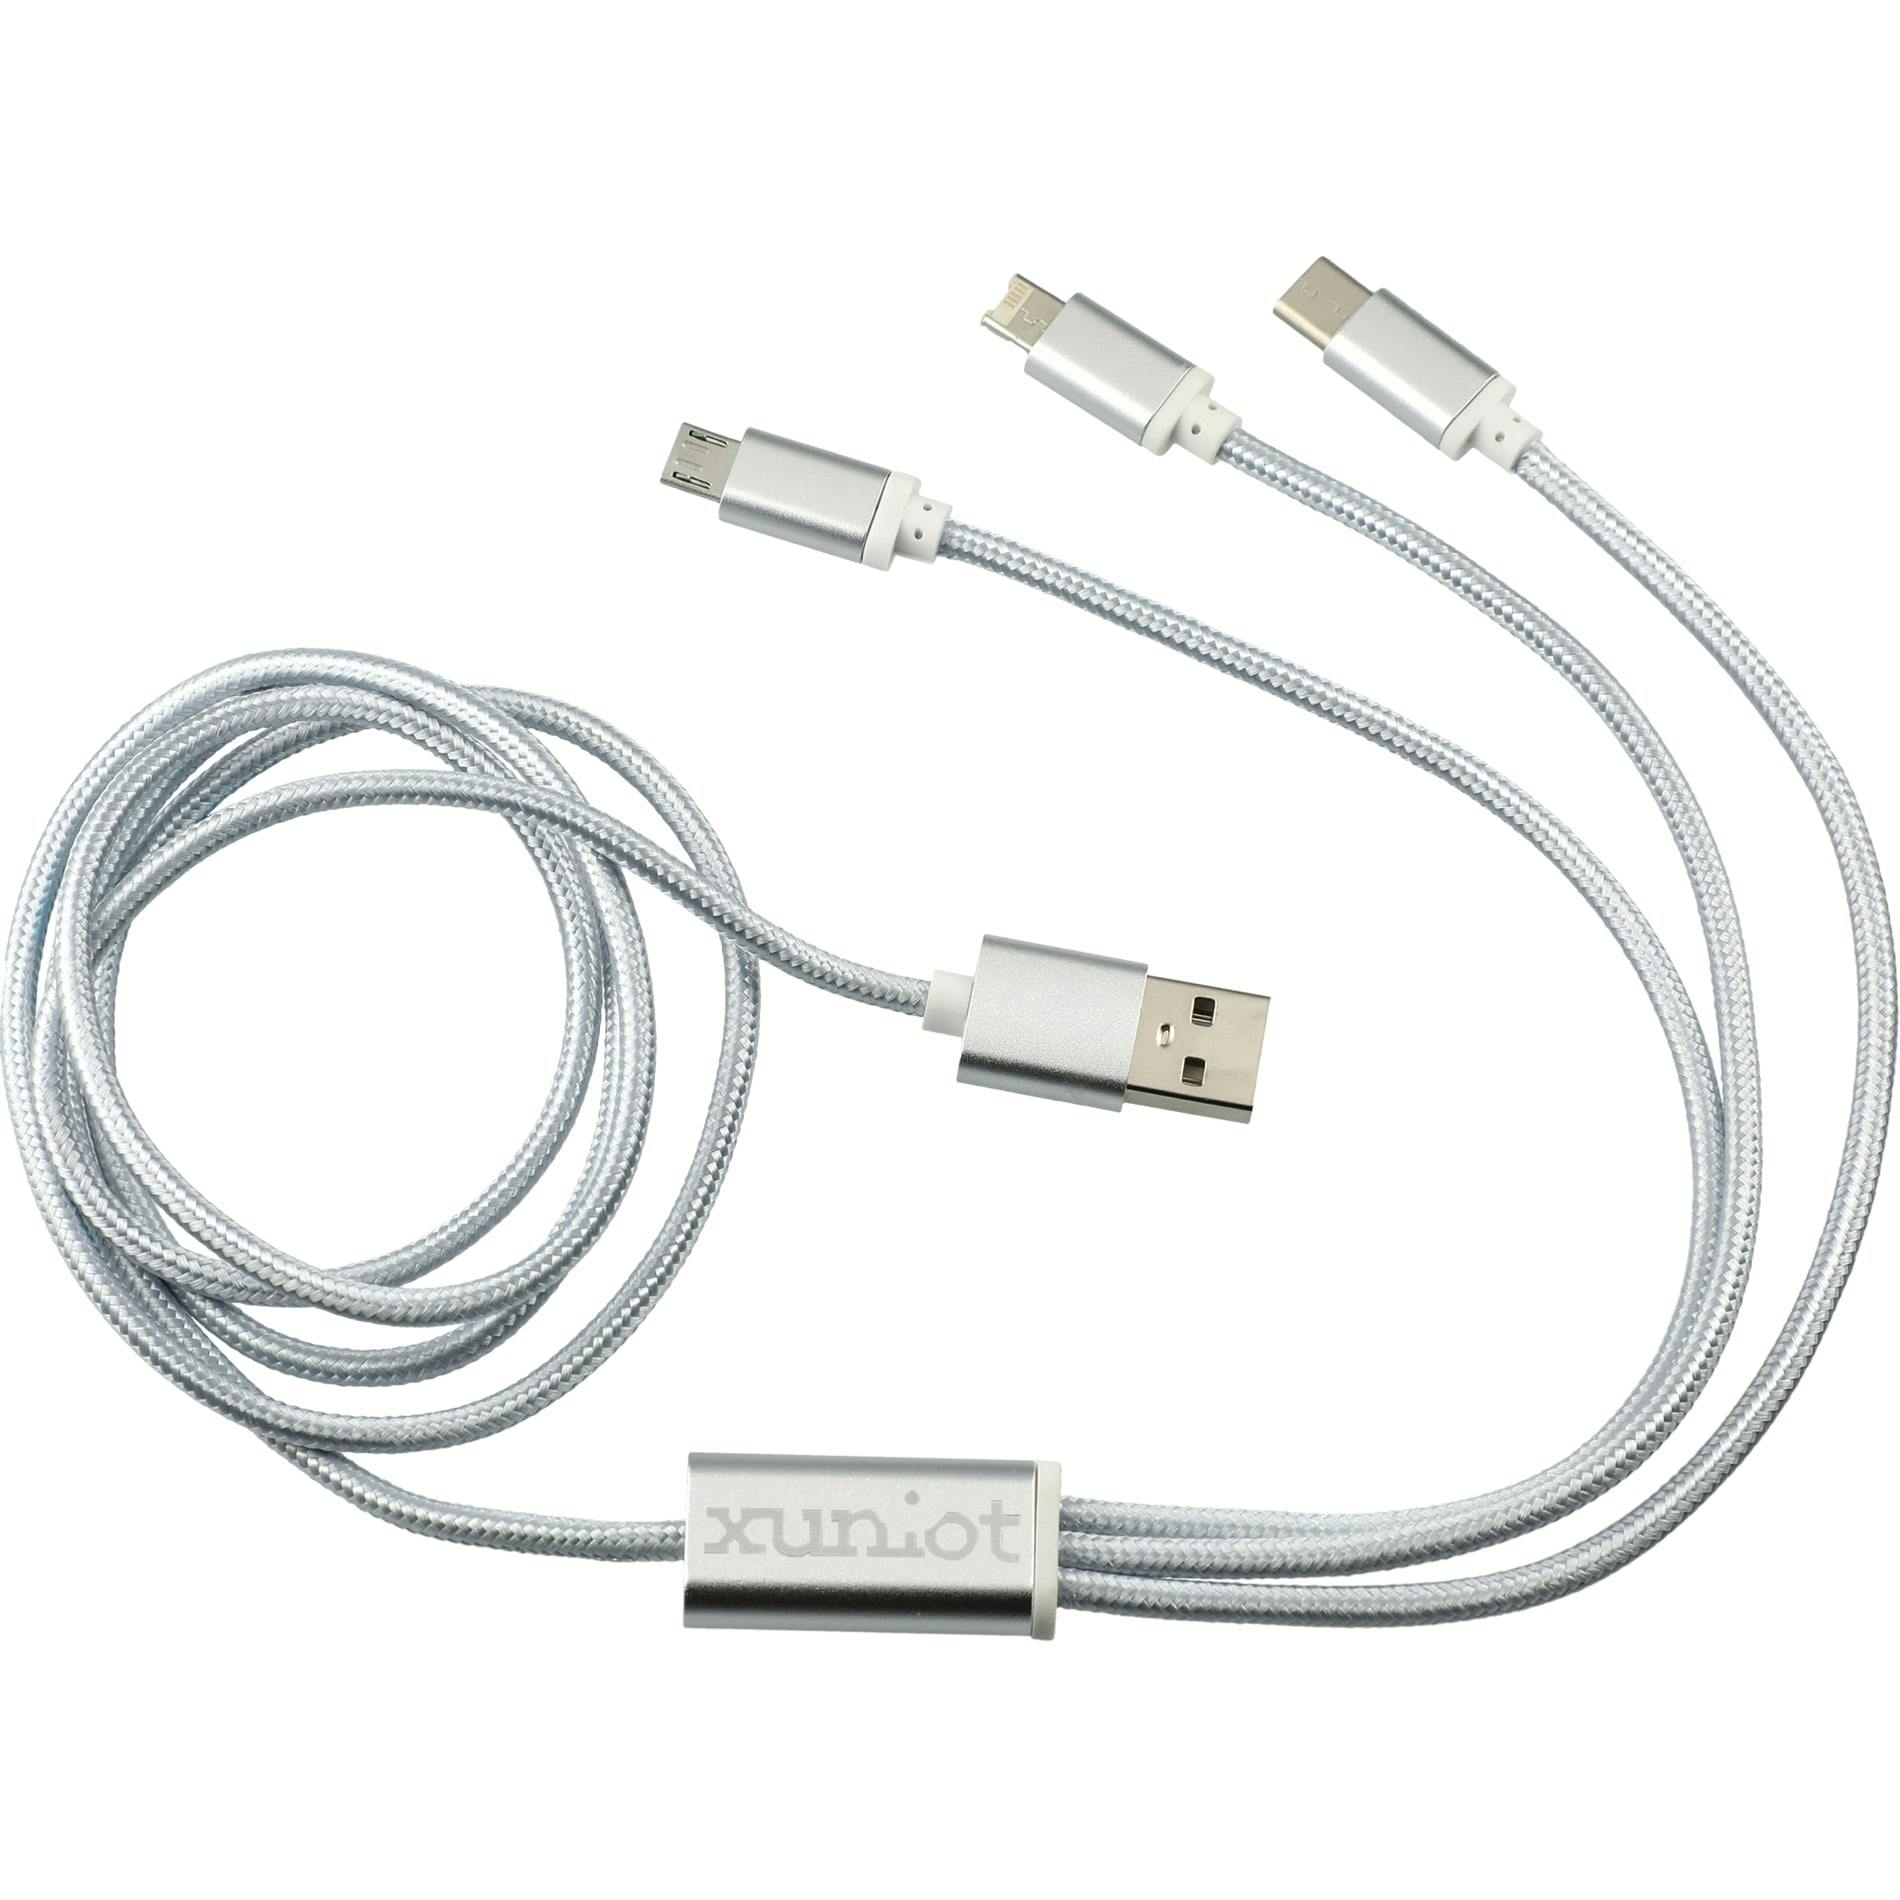 Realm 3-in-1 Long Charging Cable - additional Image 1